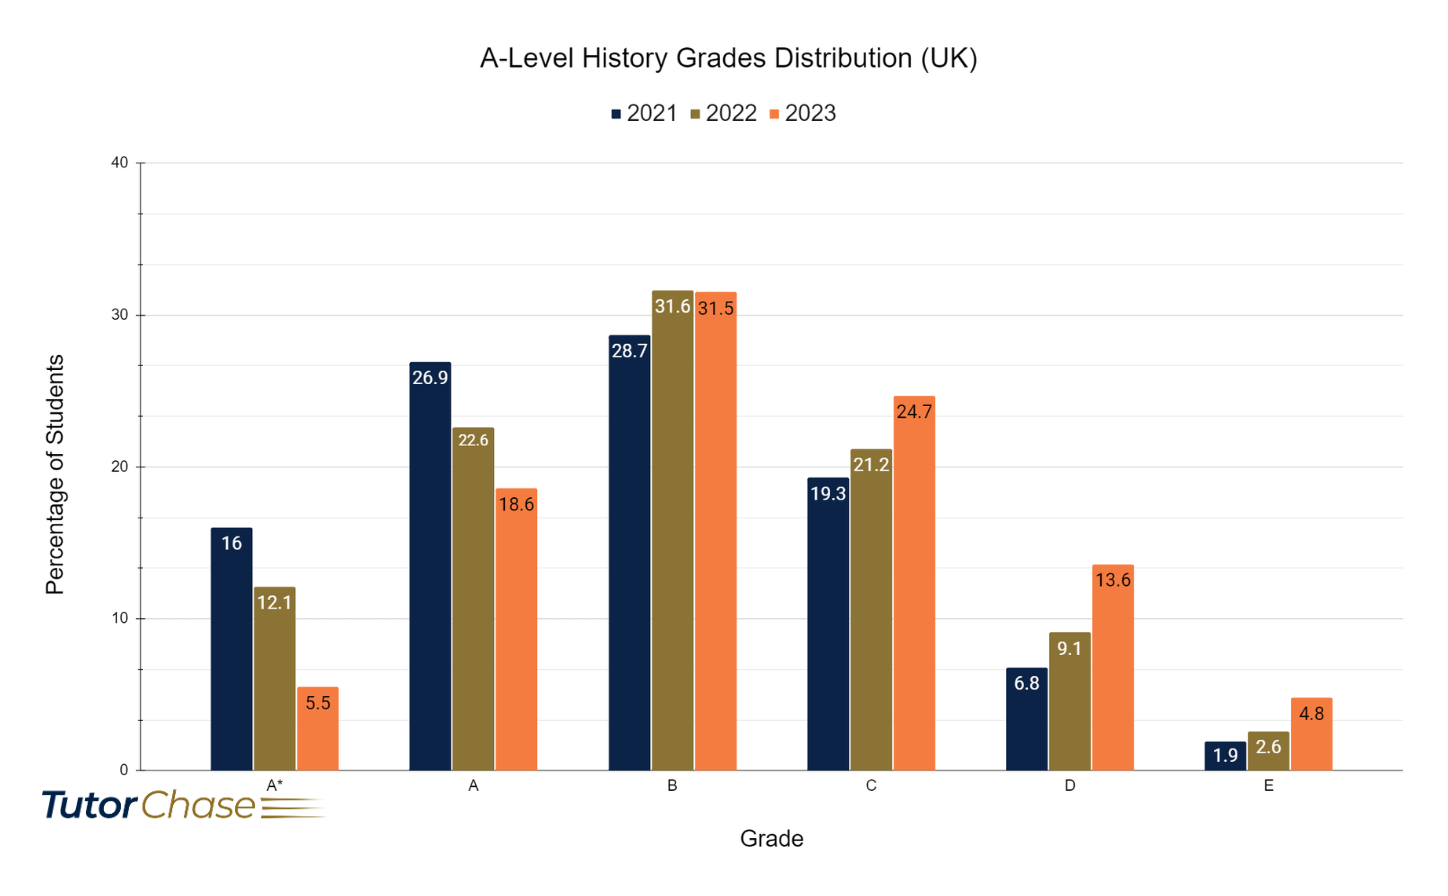 Grades distribution of A-Level History in UK 2021-2023